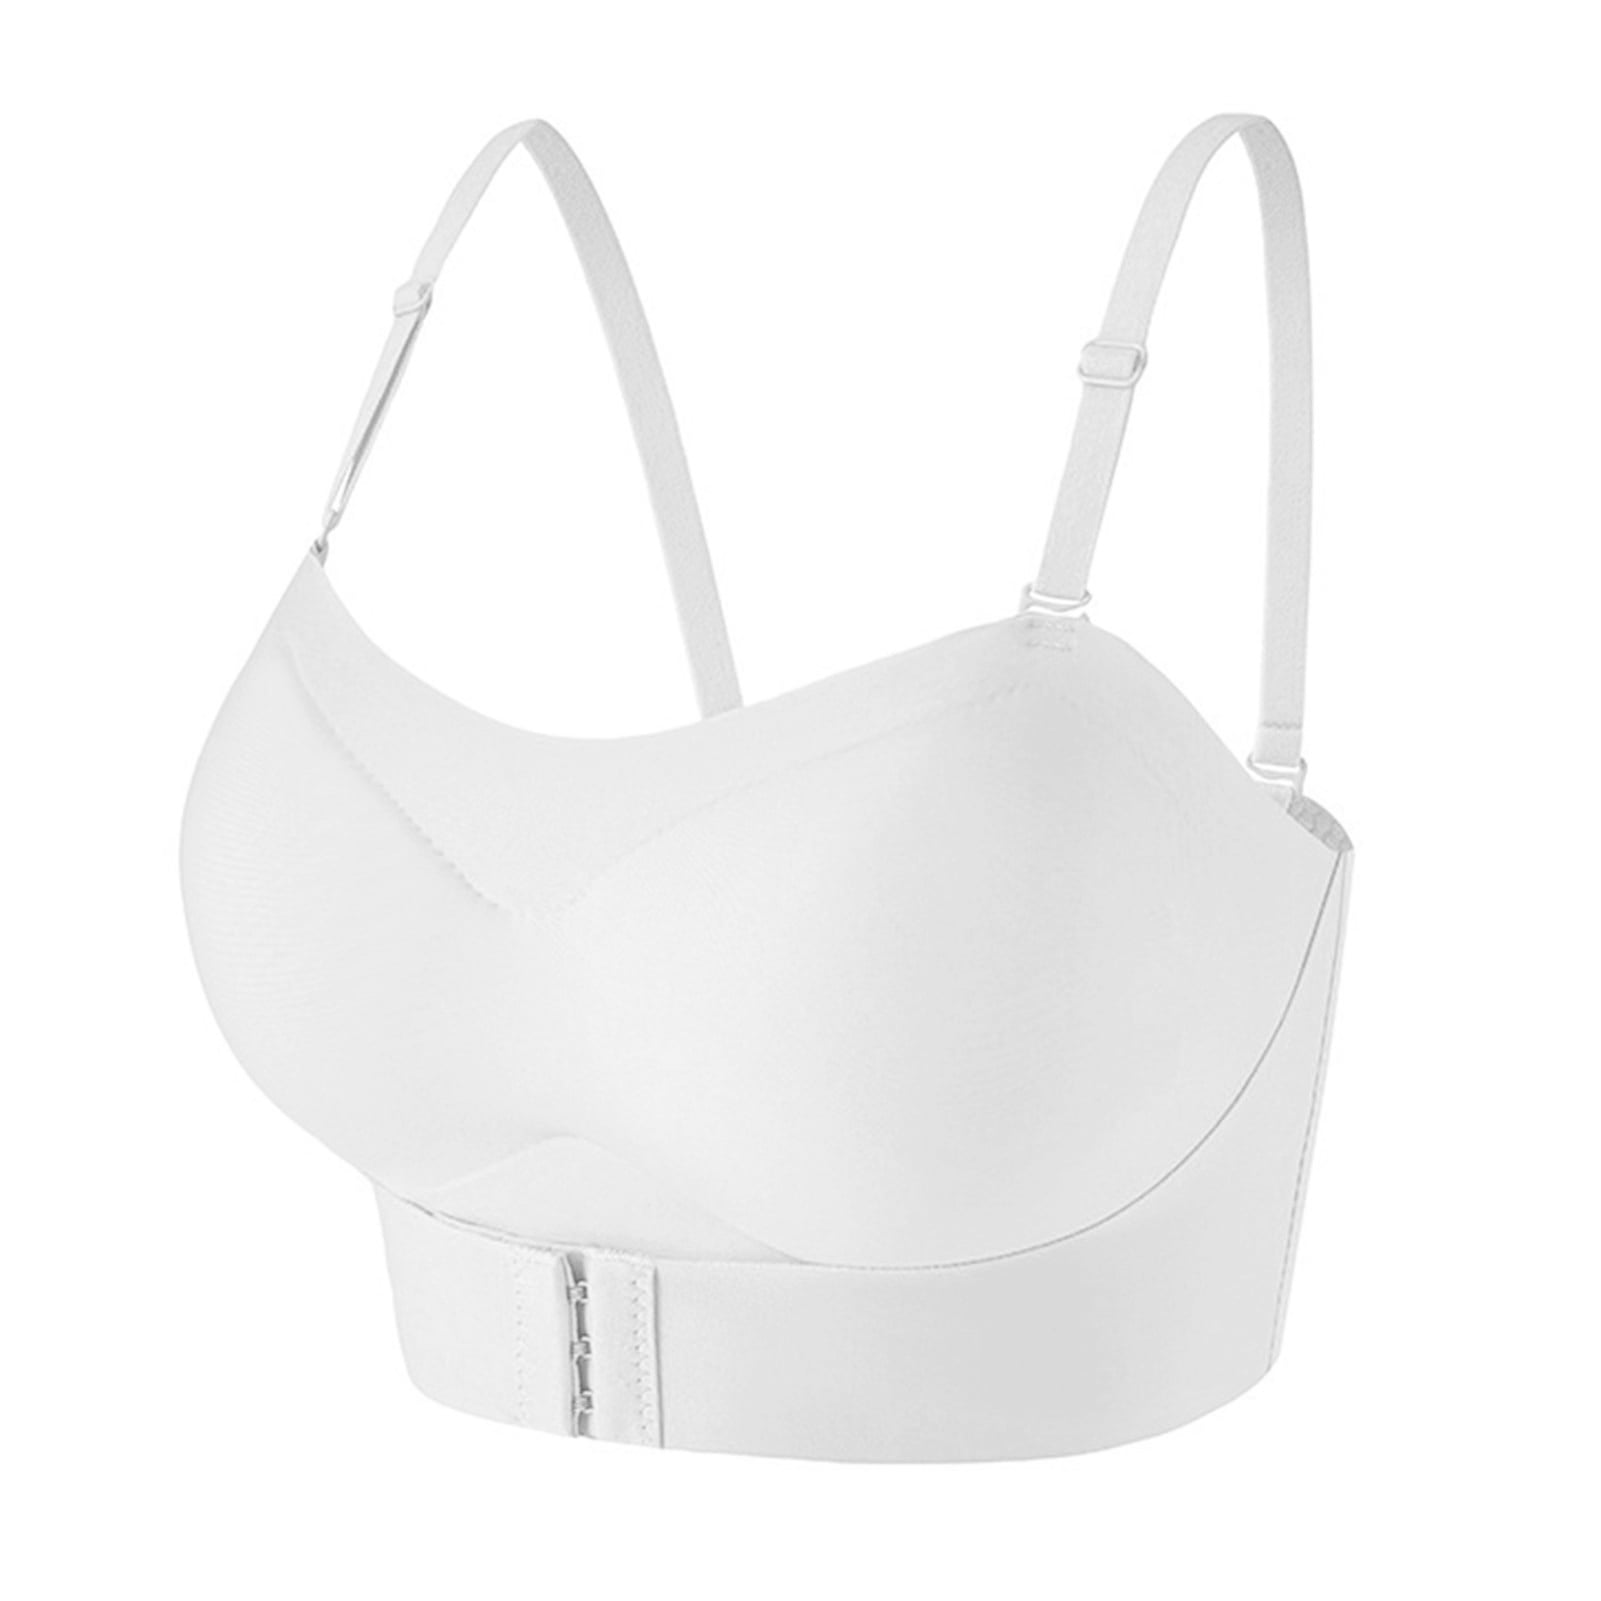 dianhelloya sports bras for women Women Bra Gathered Non-slip Elastic  Seamless Solid Color Support Breast Detachable Straps Wire Free Invisible